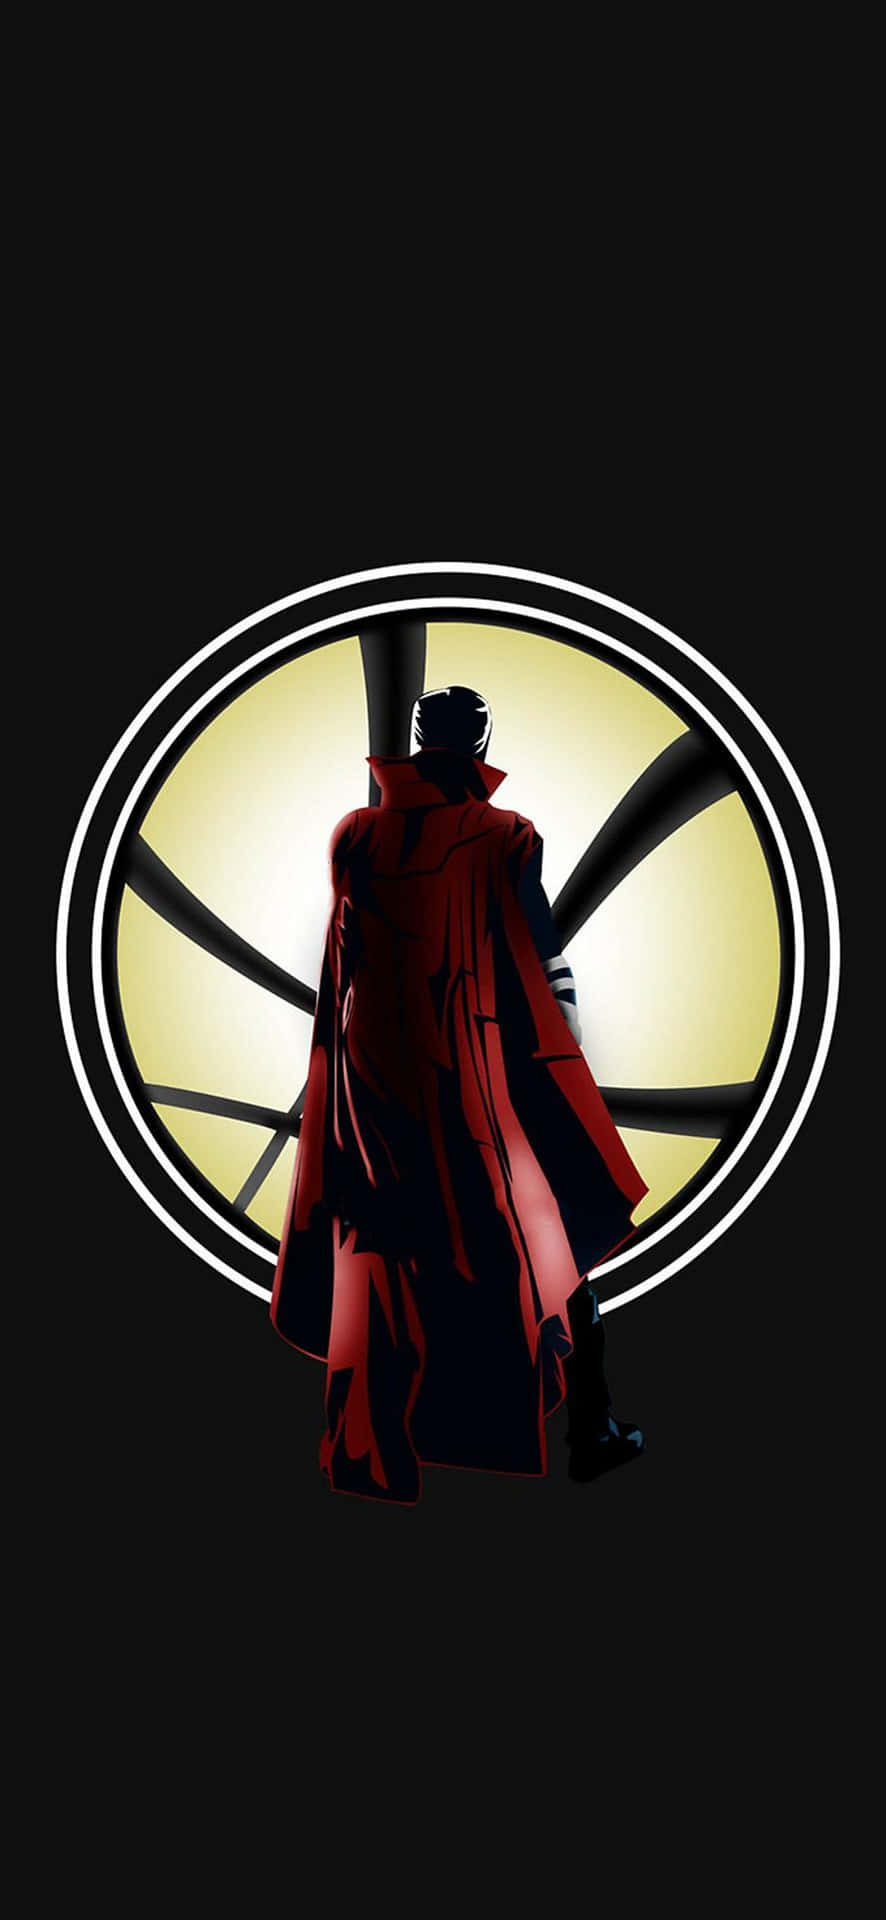 Get ready to master the mystic arts with the Doctor Strange iPhone Wallpaper